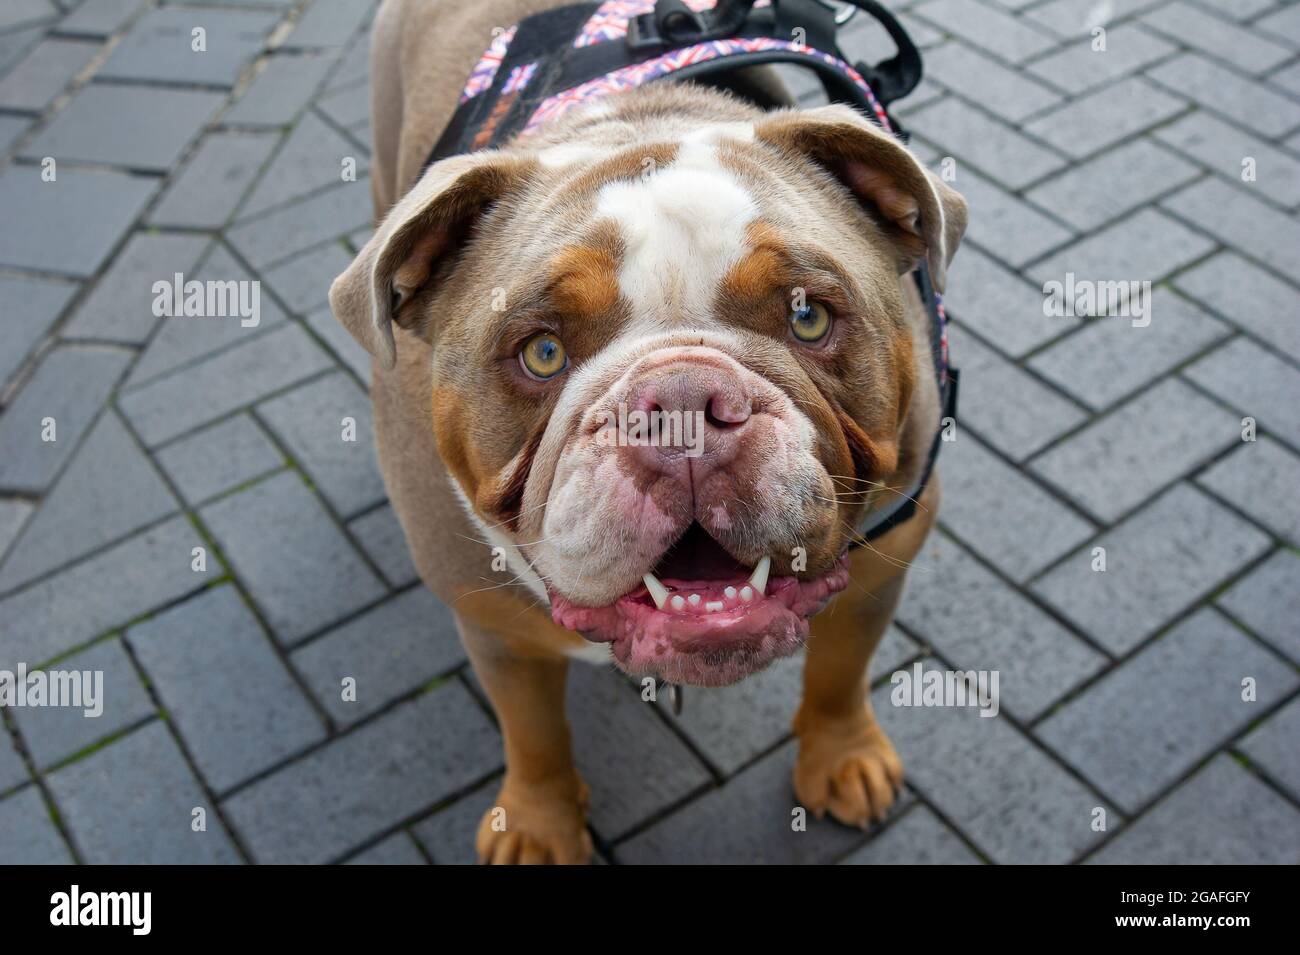 Windsor, Berkshire, UK. 26th July, 2021. Sidney the British Bulldog was getting lots of celebrity style attention today as he sat in Peascod Street, Windsor in view of Windsor Castle. Credit: Maureen McLean/Alamy Stock Photo